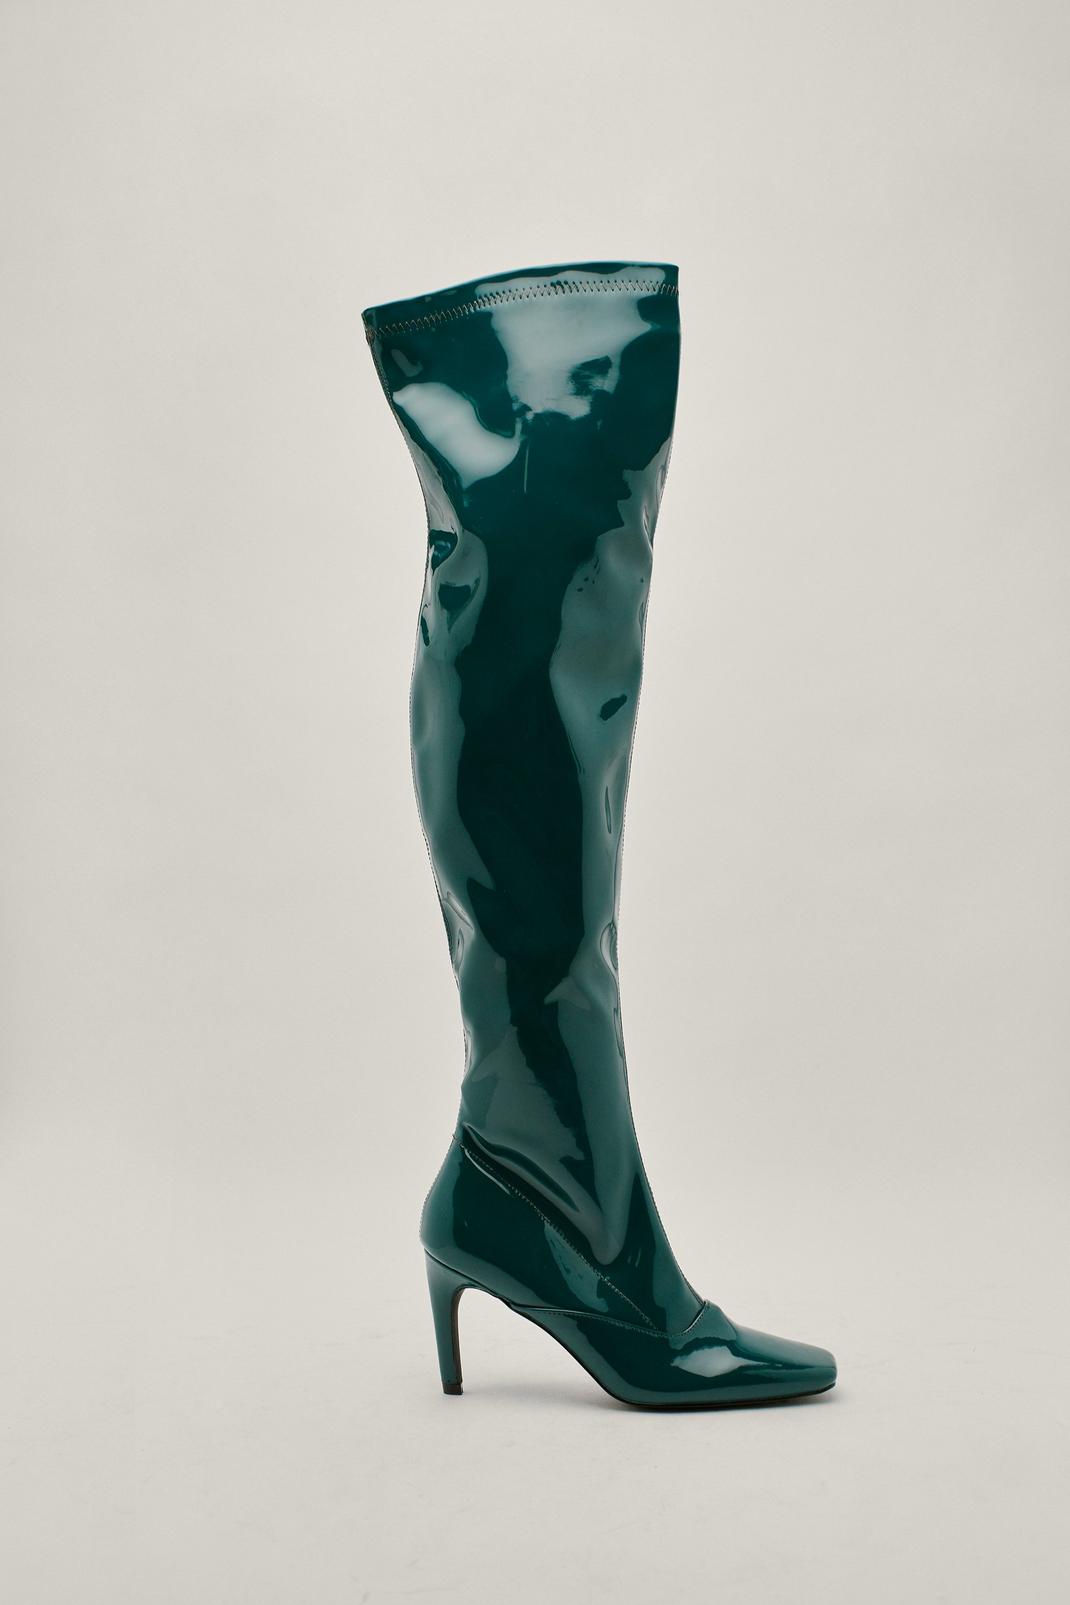 Patent Green Knee High Boots